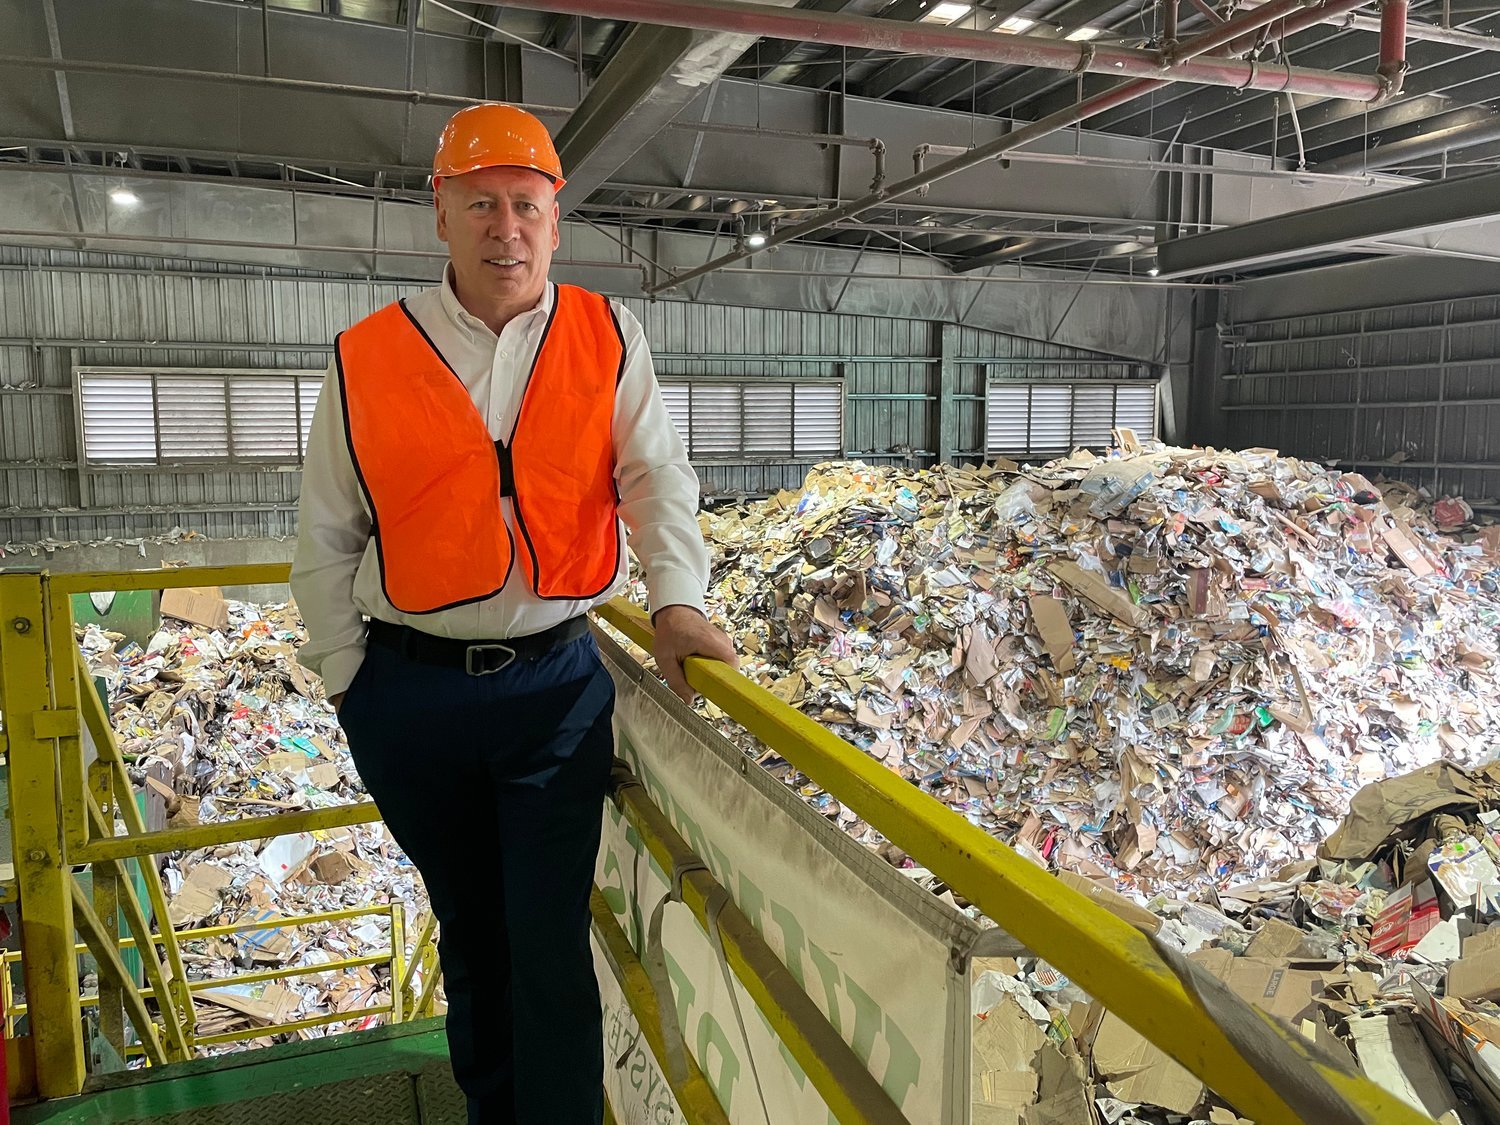 Winters Bros. senior vice president Will Flower plans to build a rail transfer station in Yaphank to haul the area’s garbage out of Long Island in the future after the landfill closes.